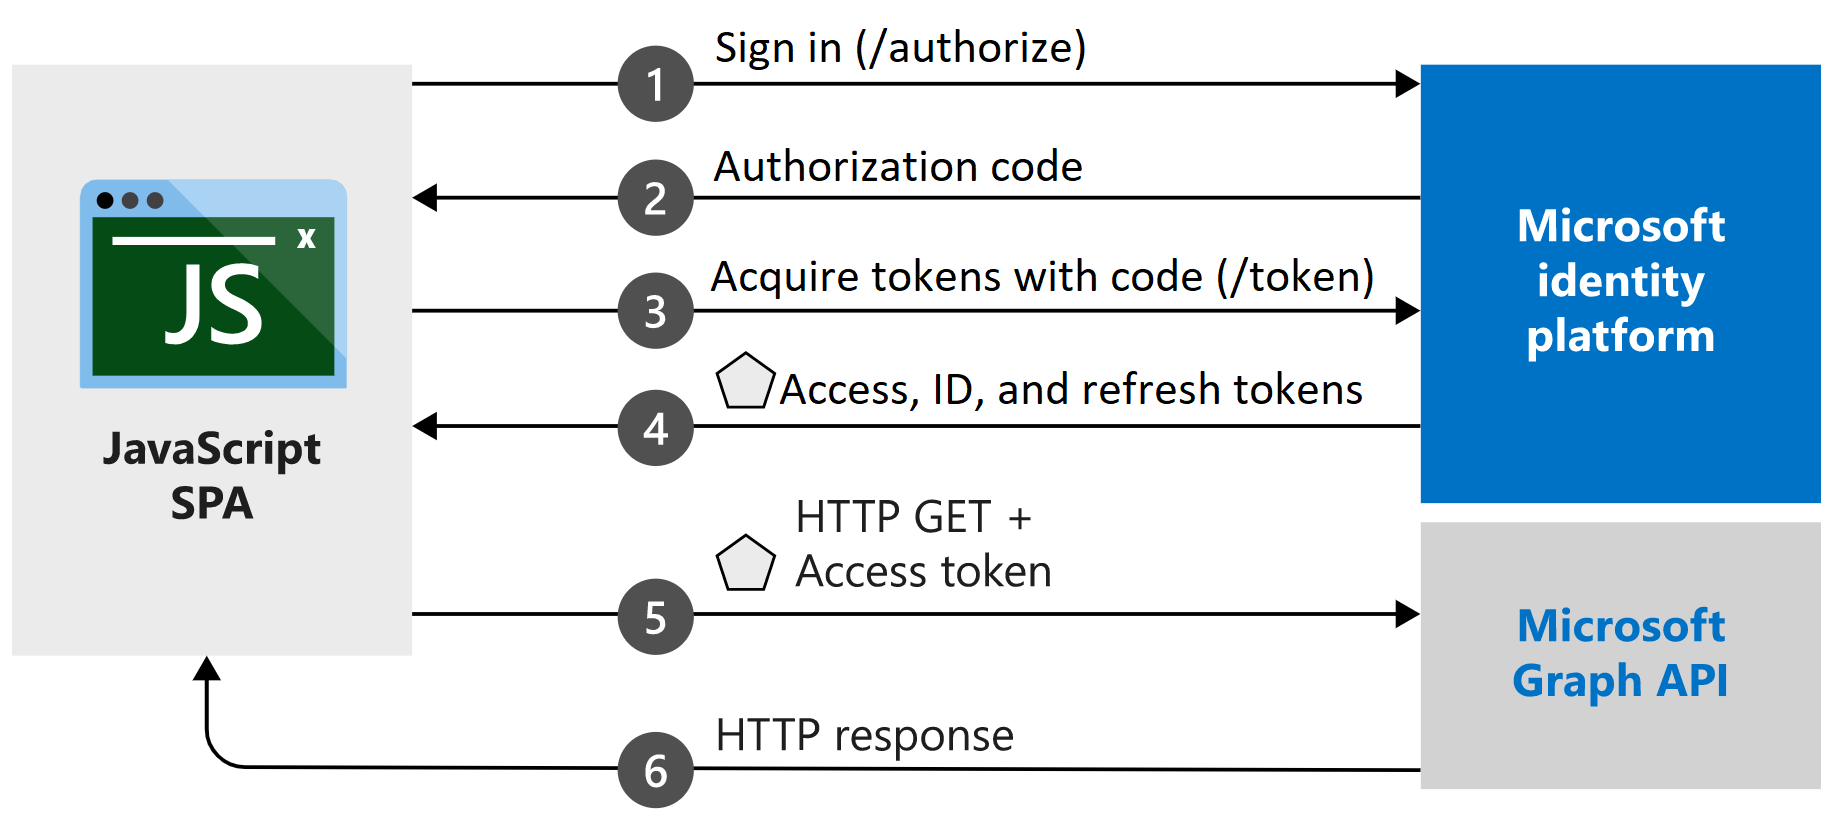 Diagram showing the authorization code flow in a single-page application